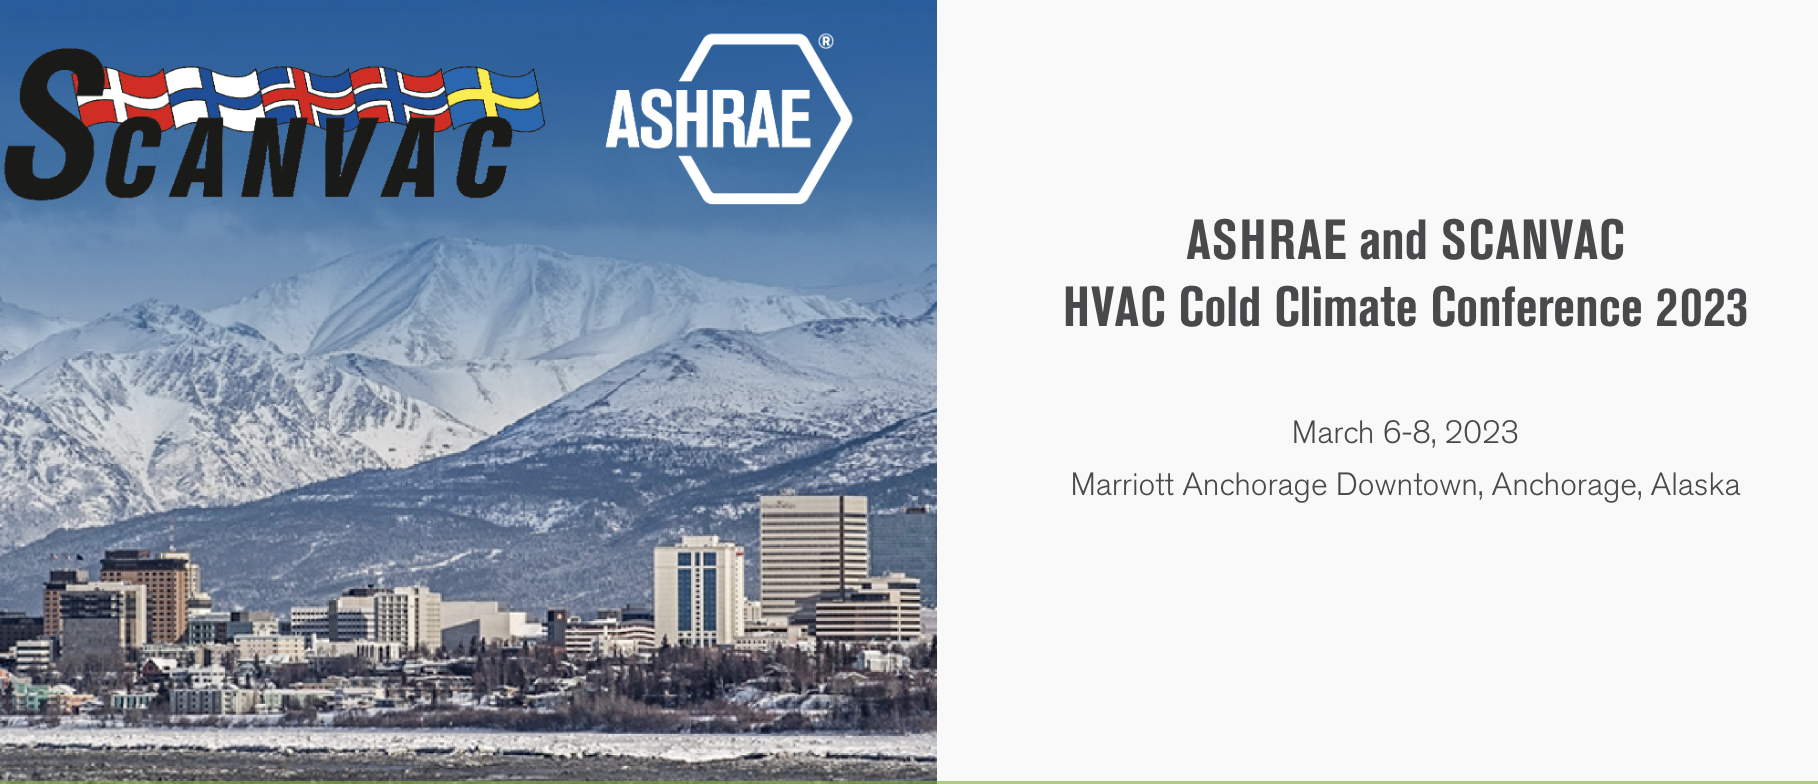 Submit Abstracts for International HVAC Conference by June 13, 2022